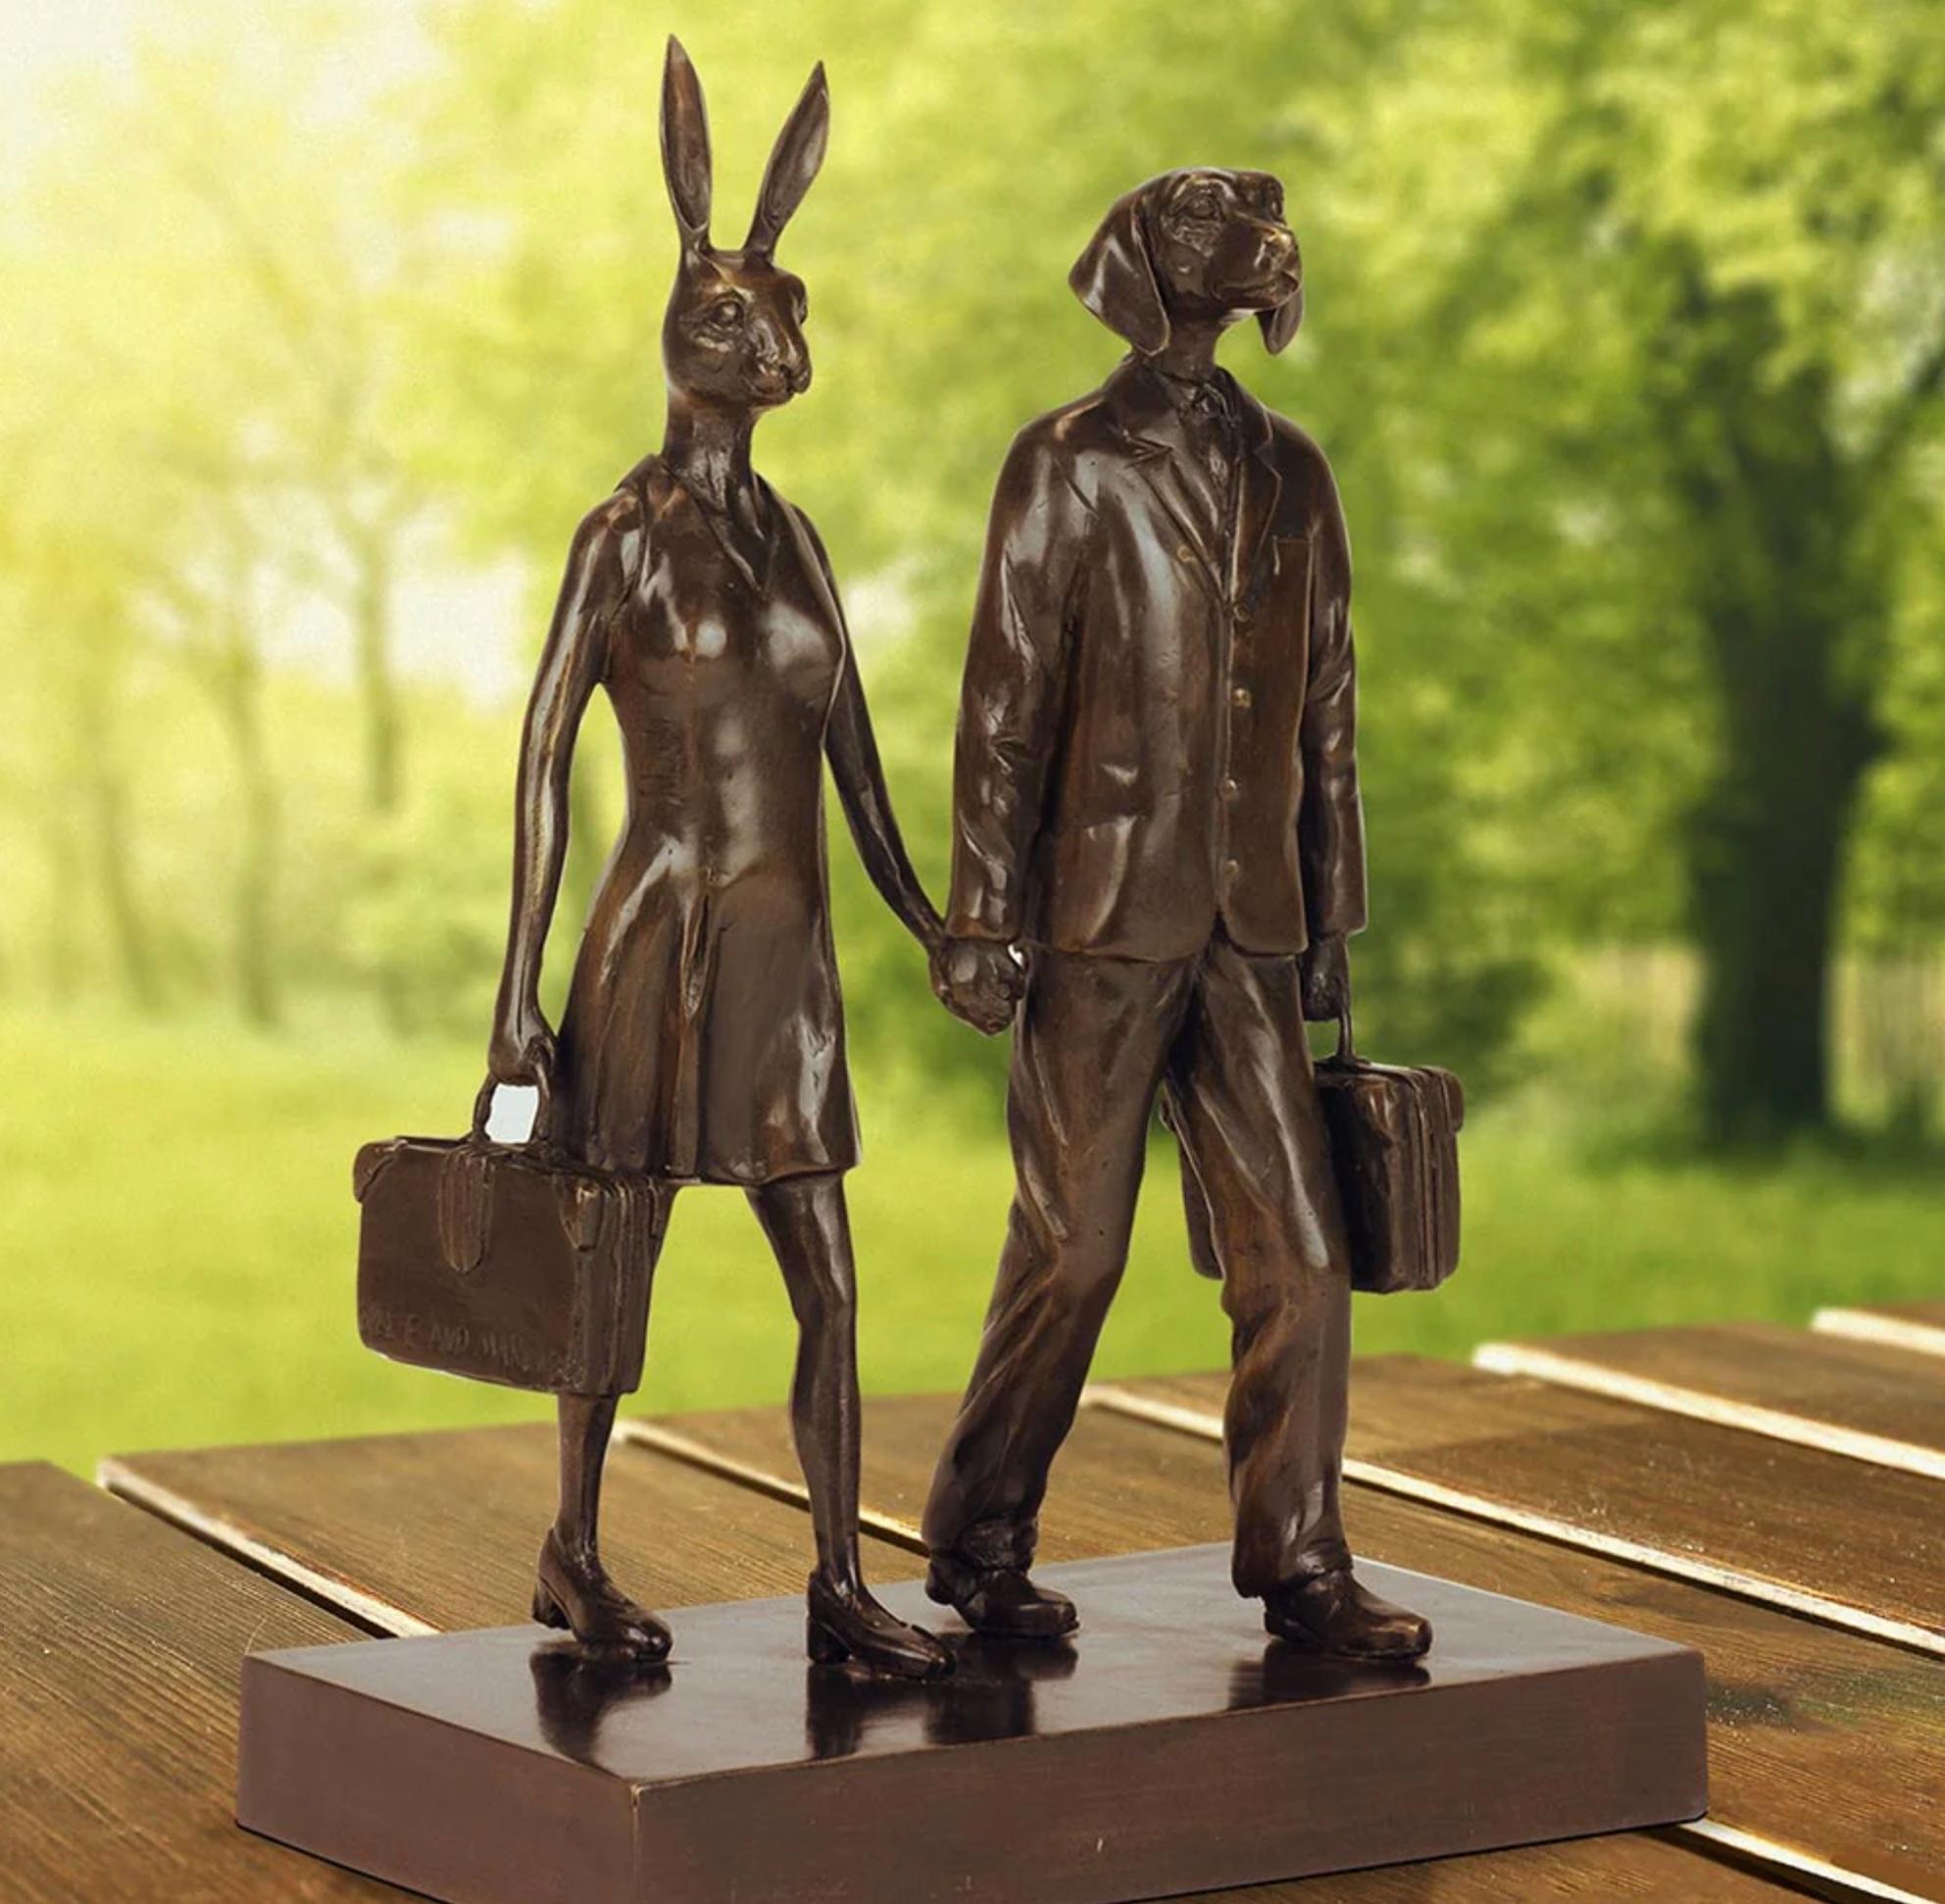 Title: They loved travelling as much as they loved each other
Authentic bronze sculpture

This authentic bronze sculpture titled 'They loved travelling as much as they loved each other' by artists Gillie and Marc has been meticulously crafted in